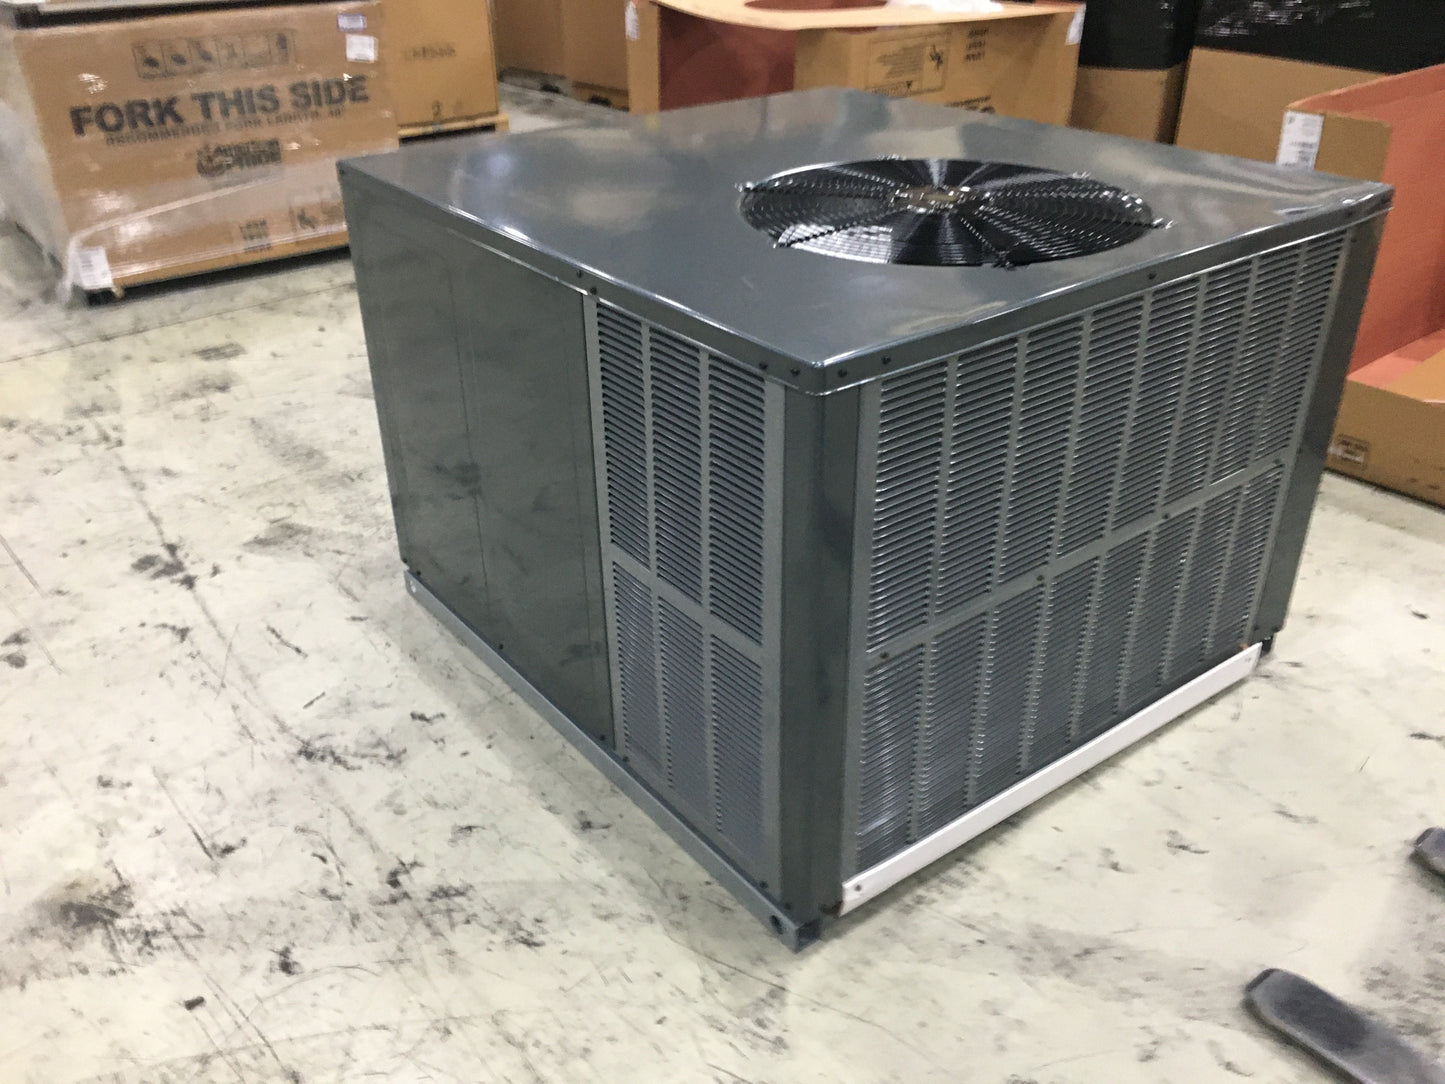 2 TON SINGLE-STAGE MULTI-POSITION PACKAGED HEAT PUMP UNIT, 14 SEER, 208-230/60/1, R-410A